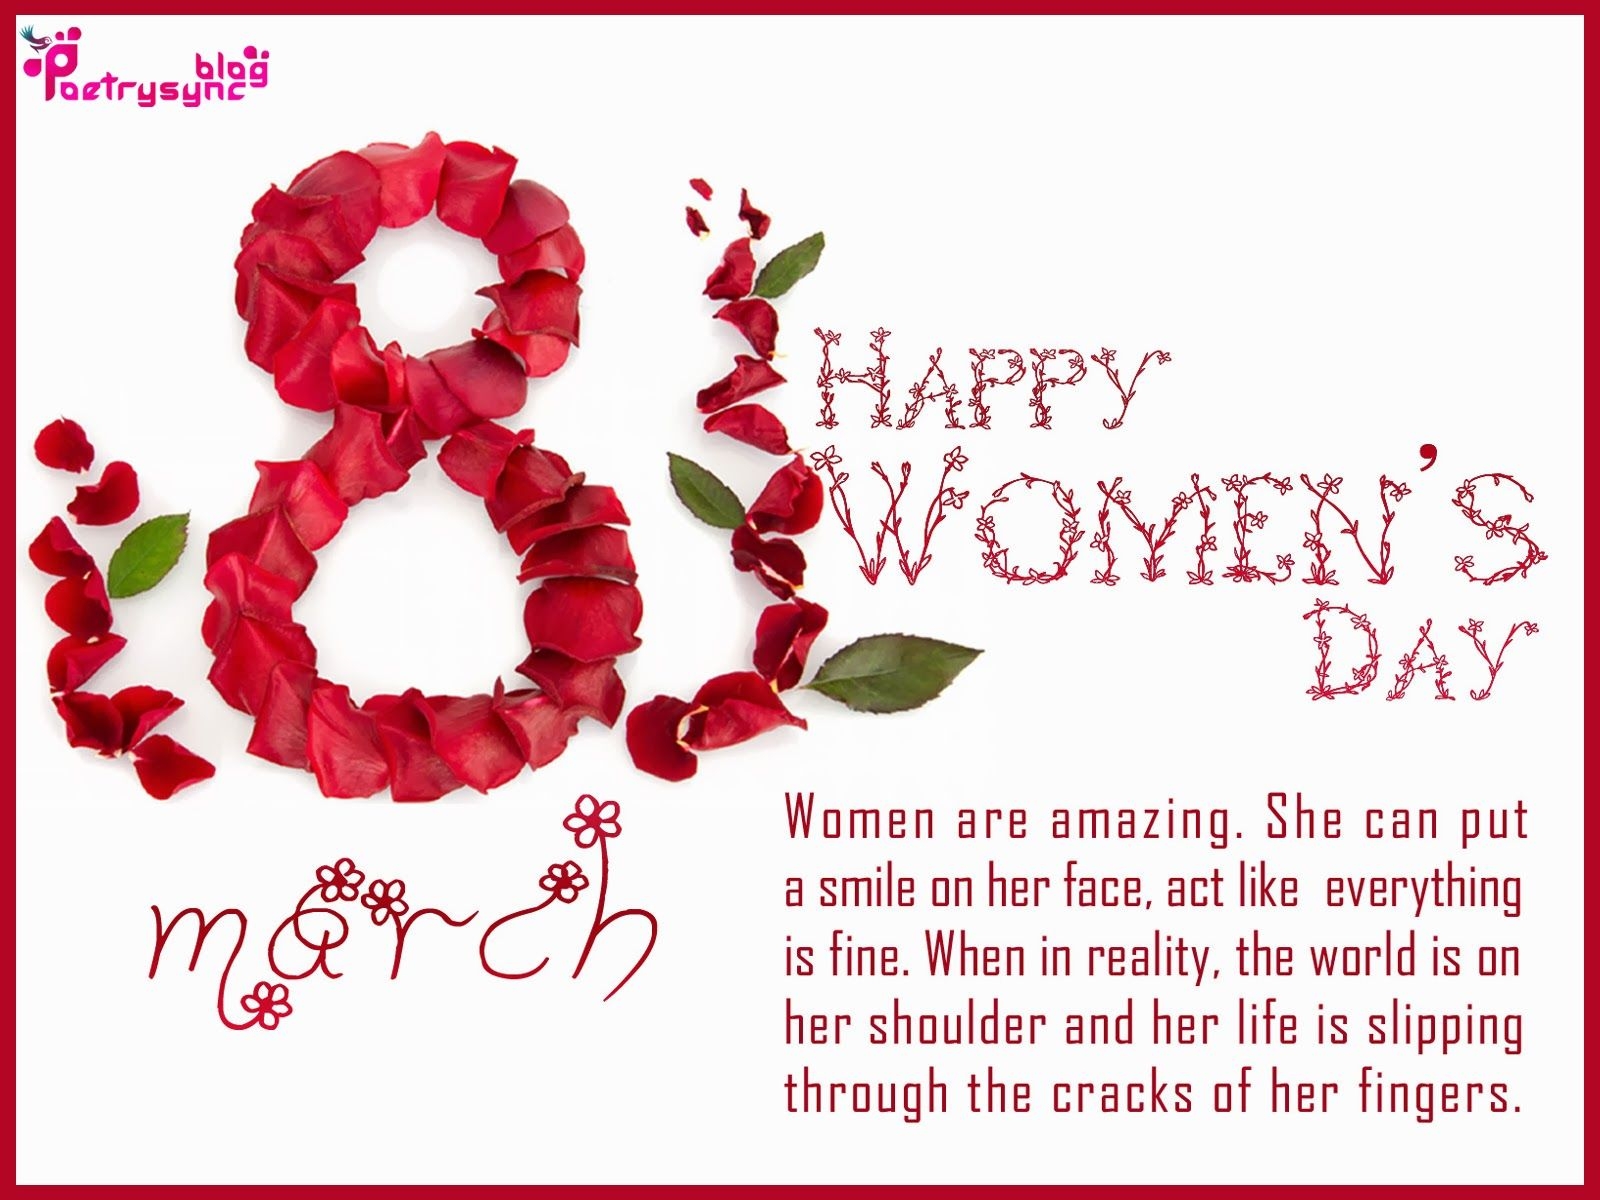 Women’s Day (March 8): History, Significance, Celebrations